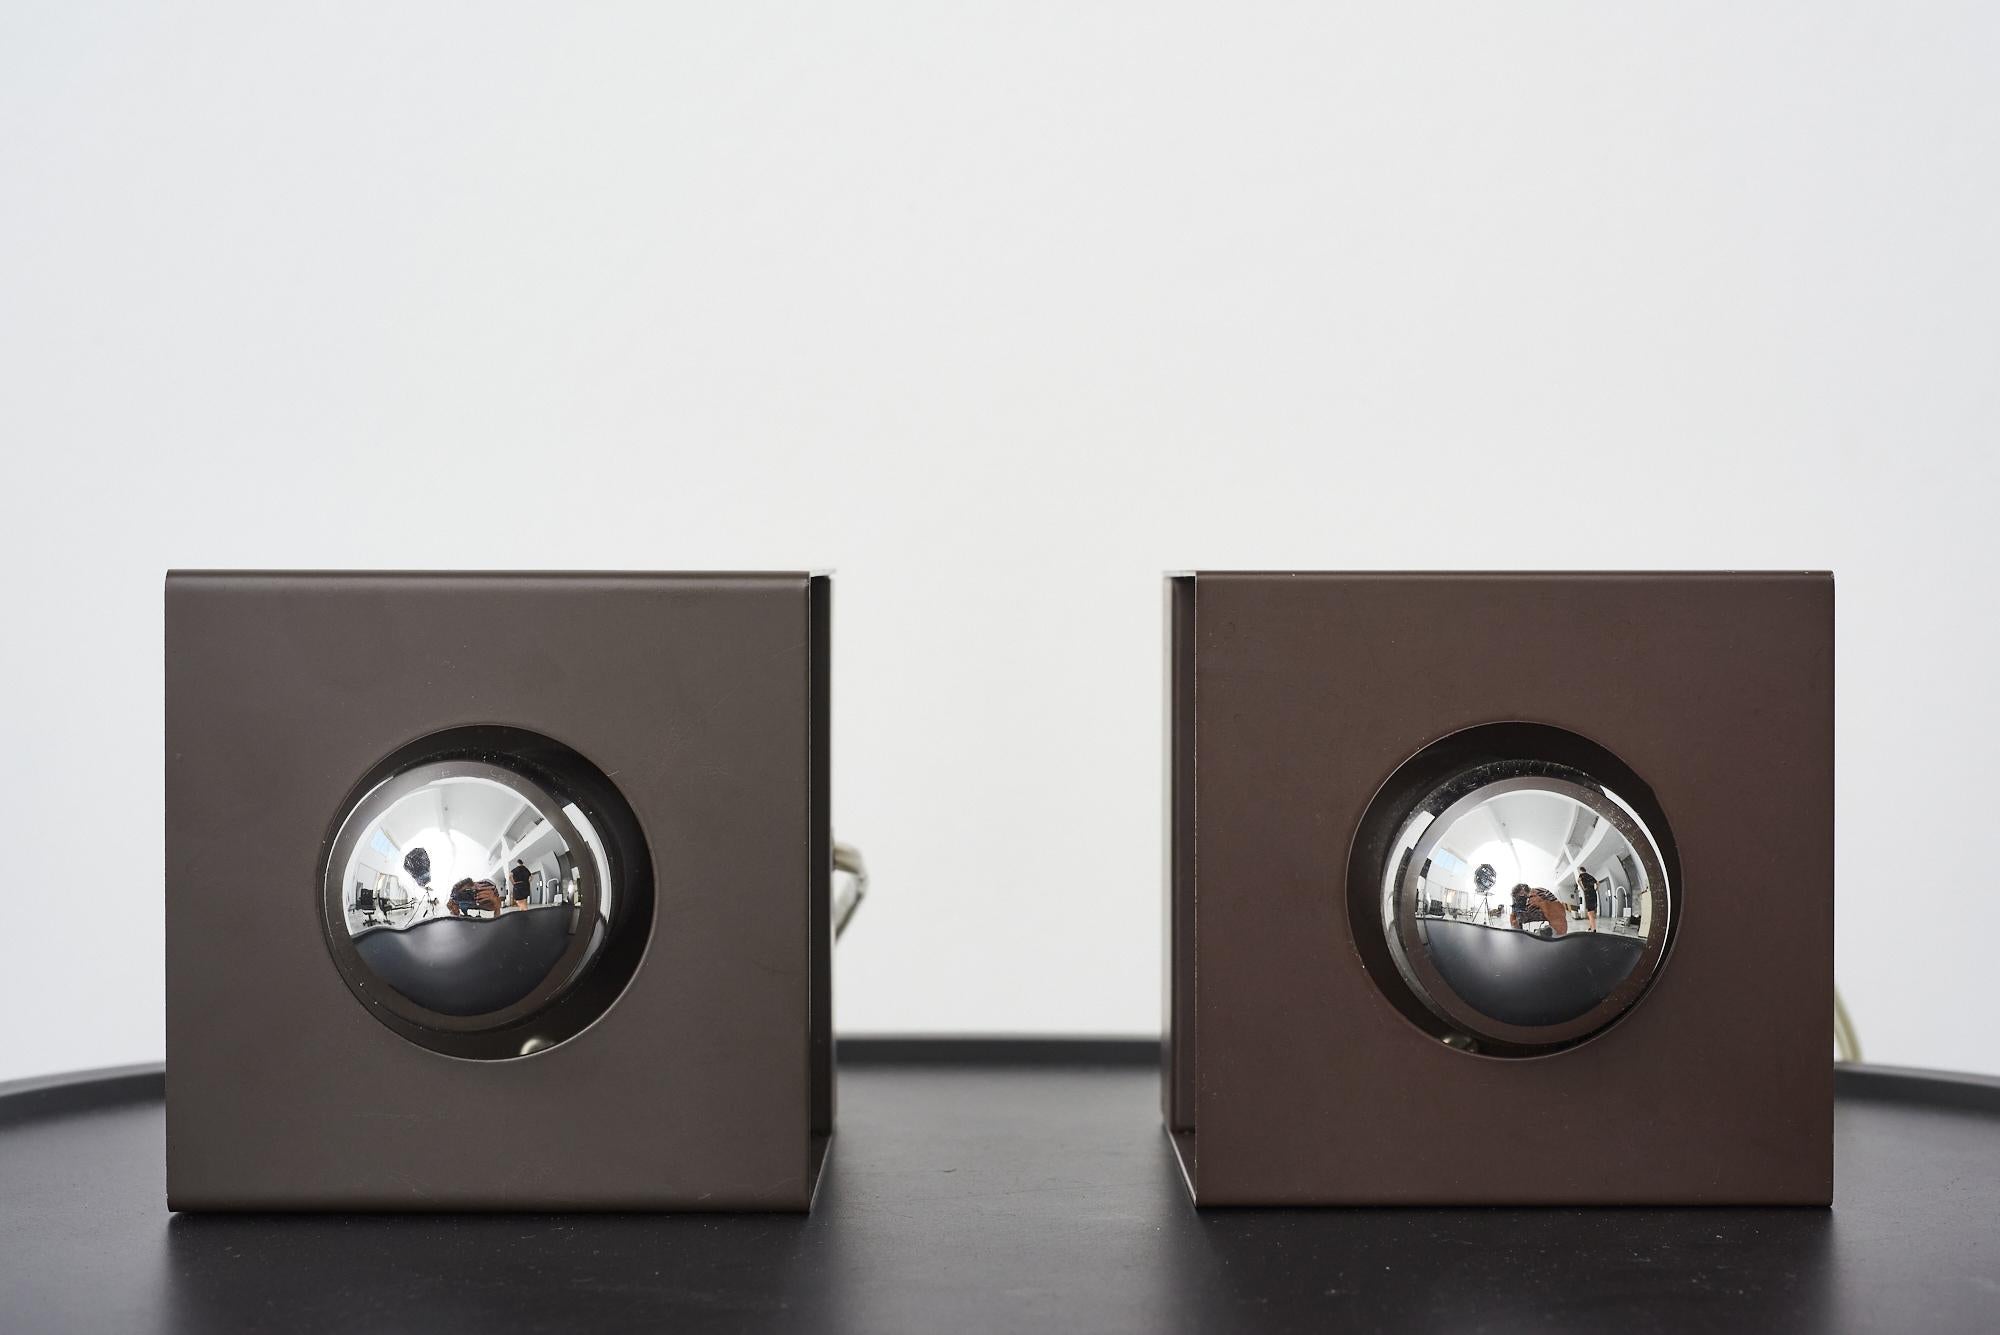 A set of 2 Modernist cube wall lamps by Philips, The Netherlands, 1980s
The lamps have an on/off button and plugs to put directly to the wall.